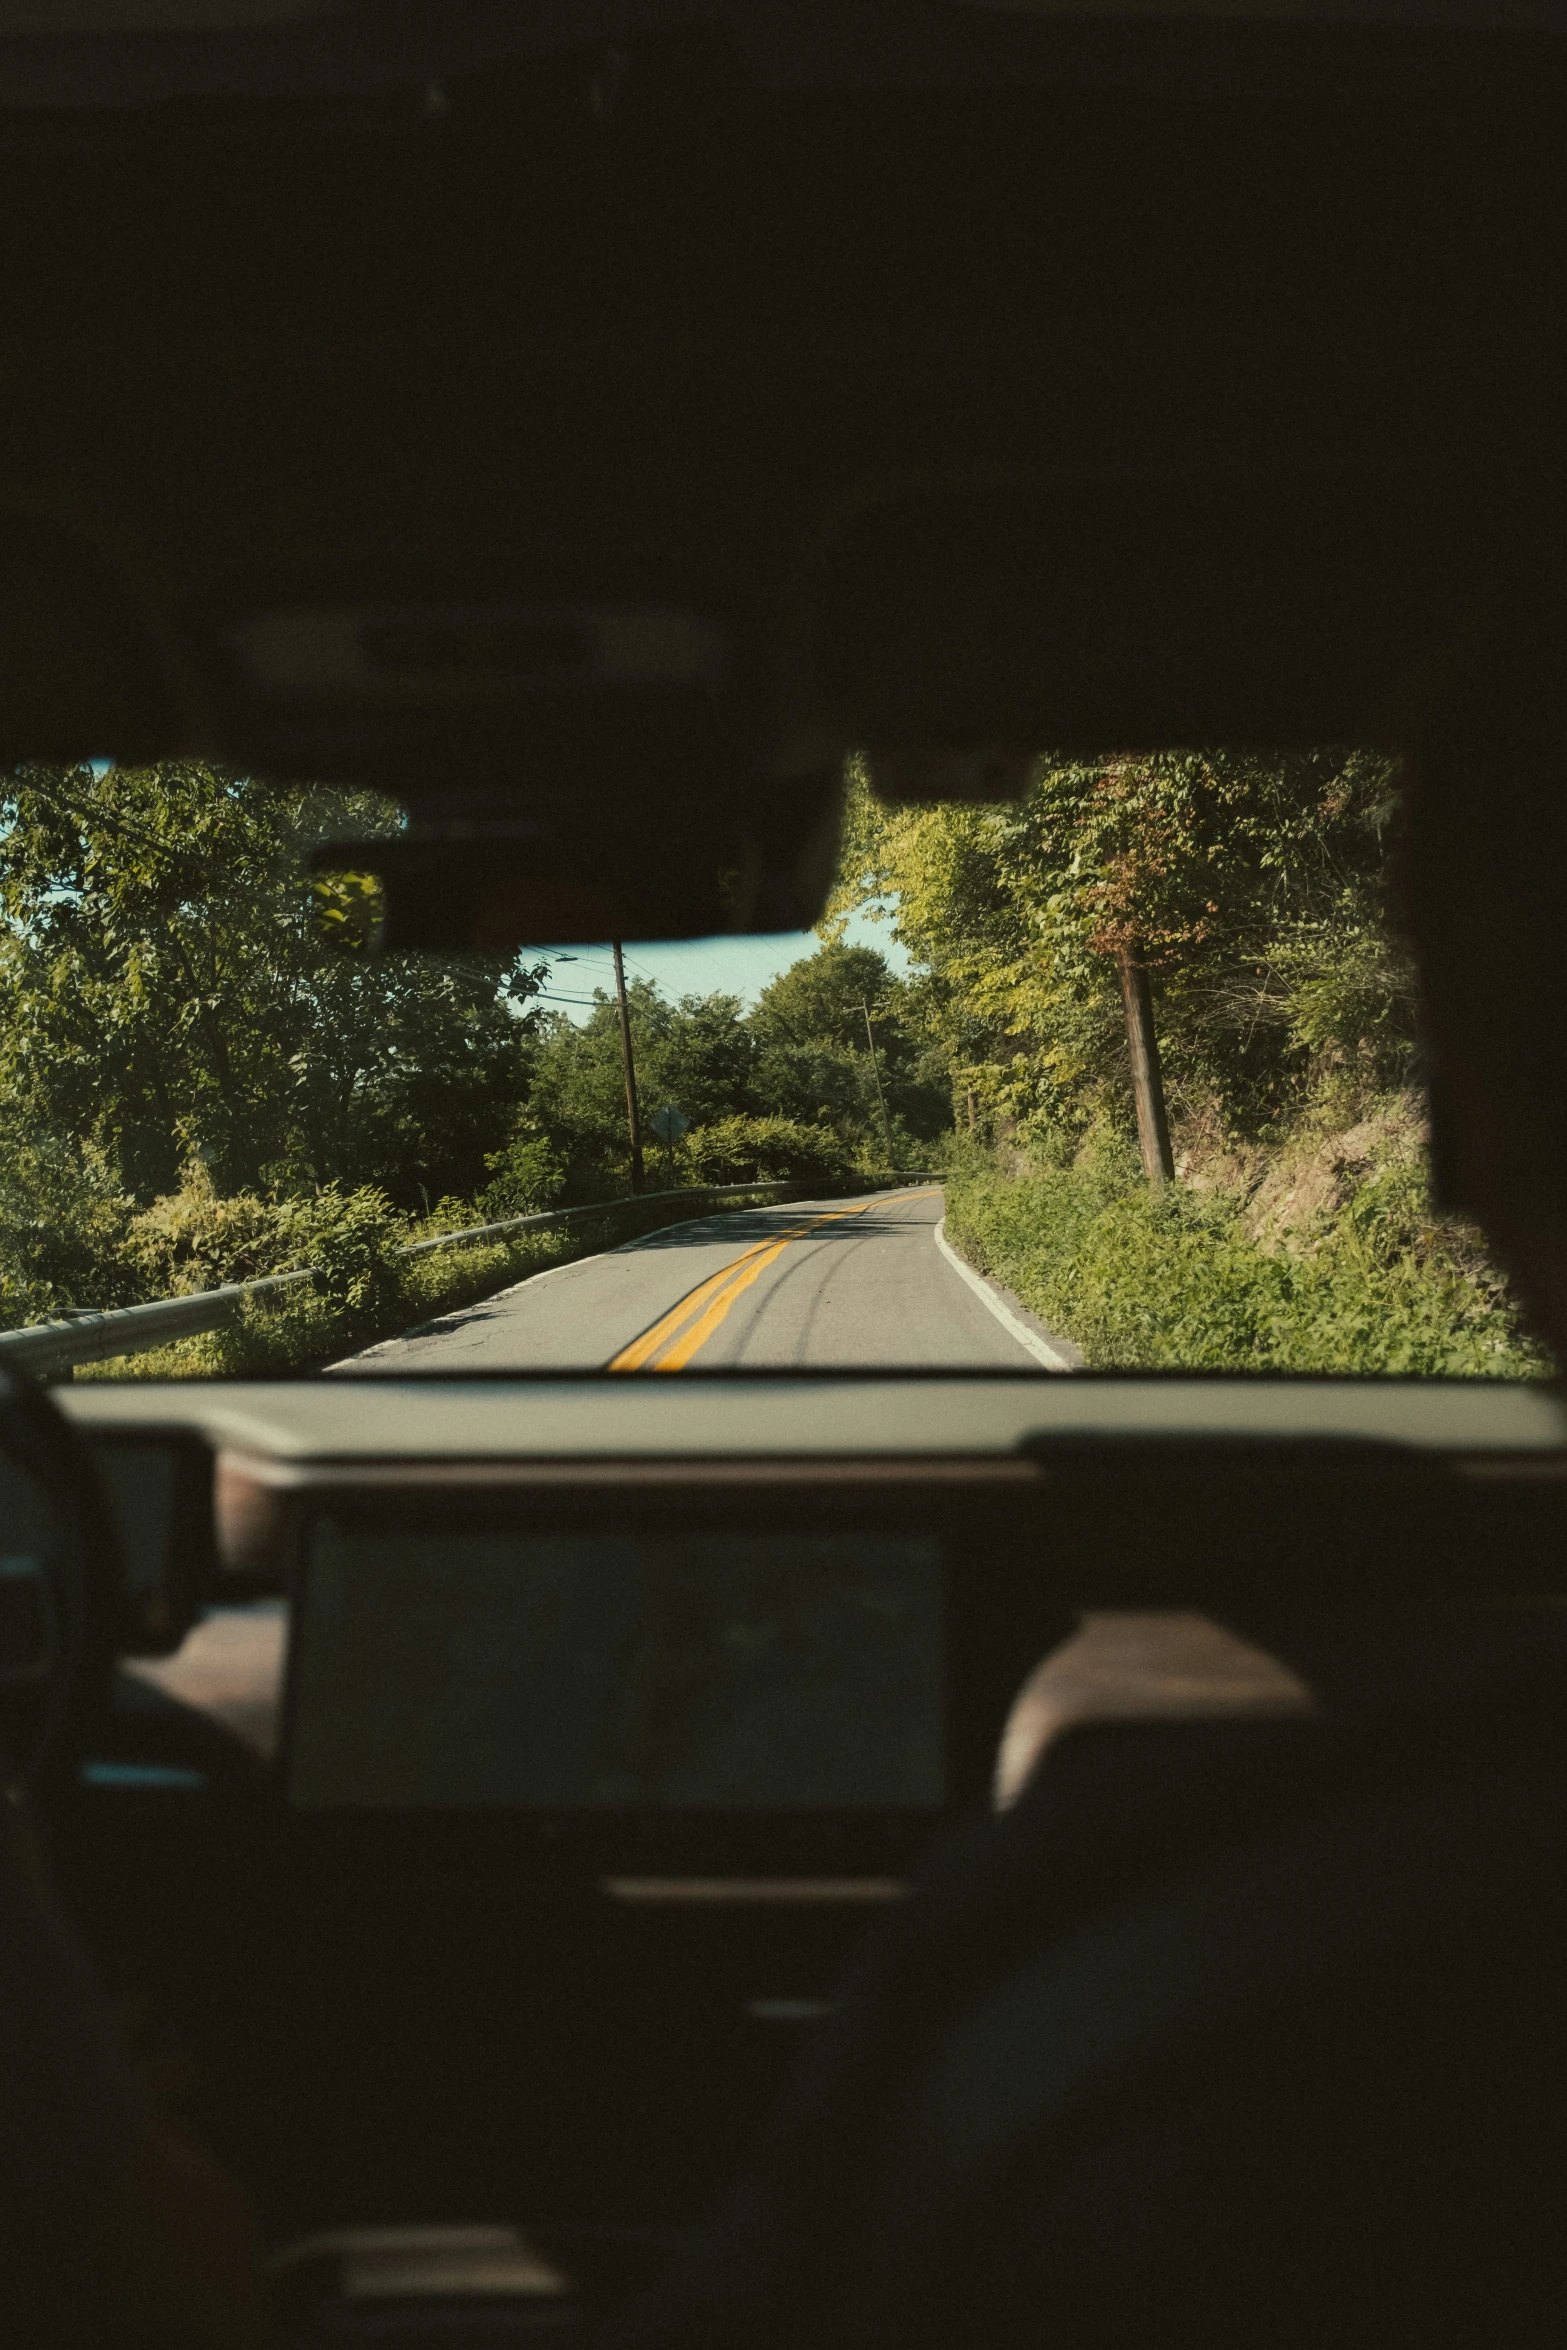 view from the dashboard of a vehicle during a drive on an asphalt road in a forested area